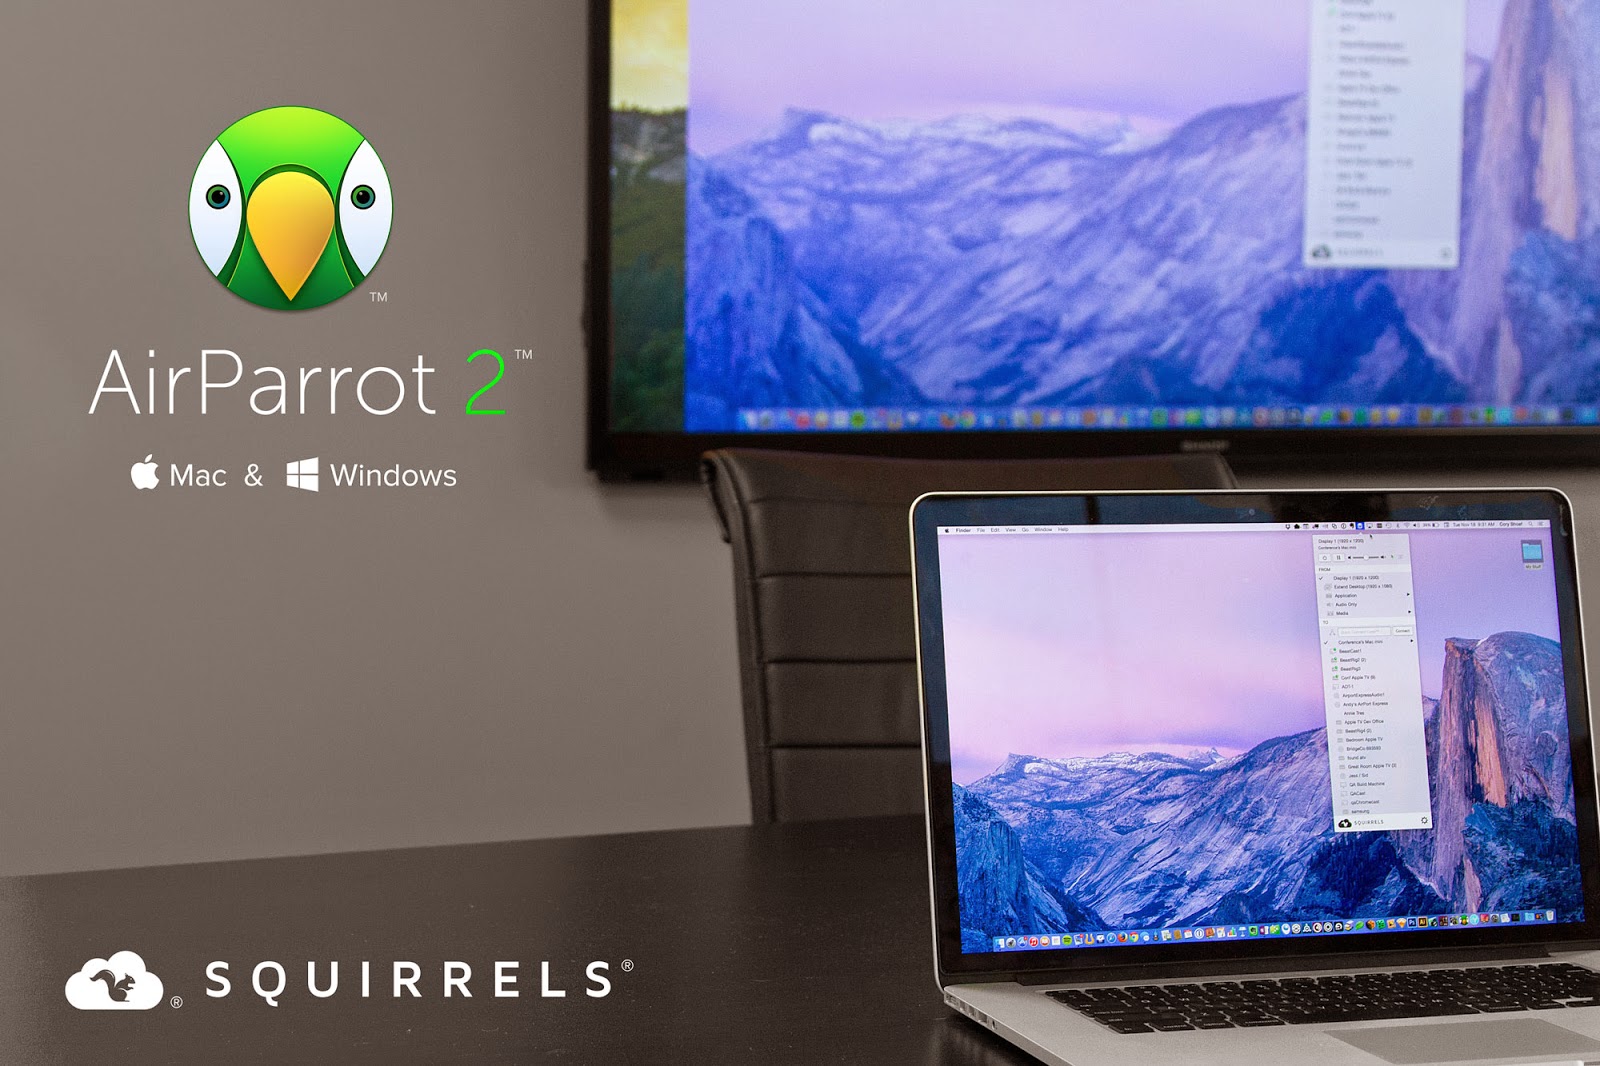 Download airparrot 2 cracked for macbook